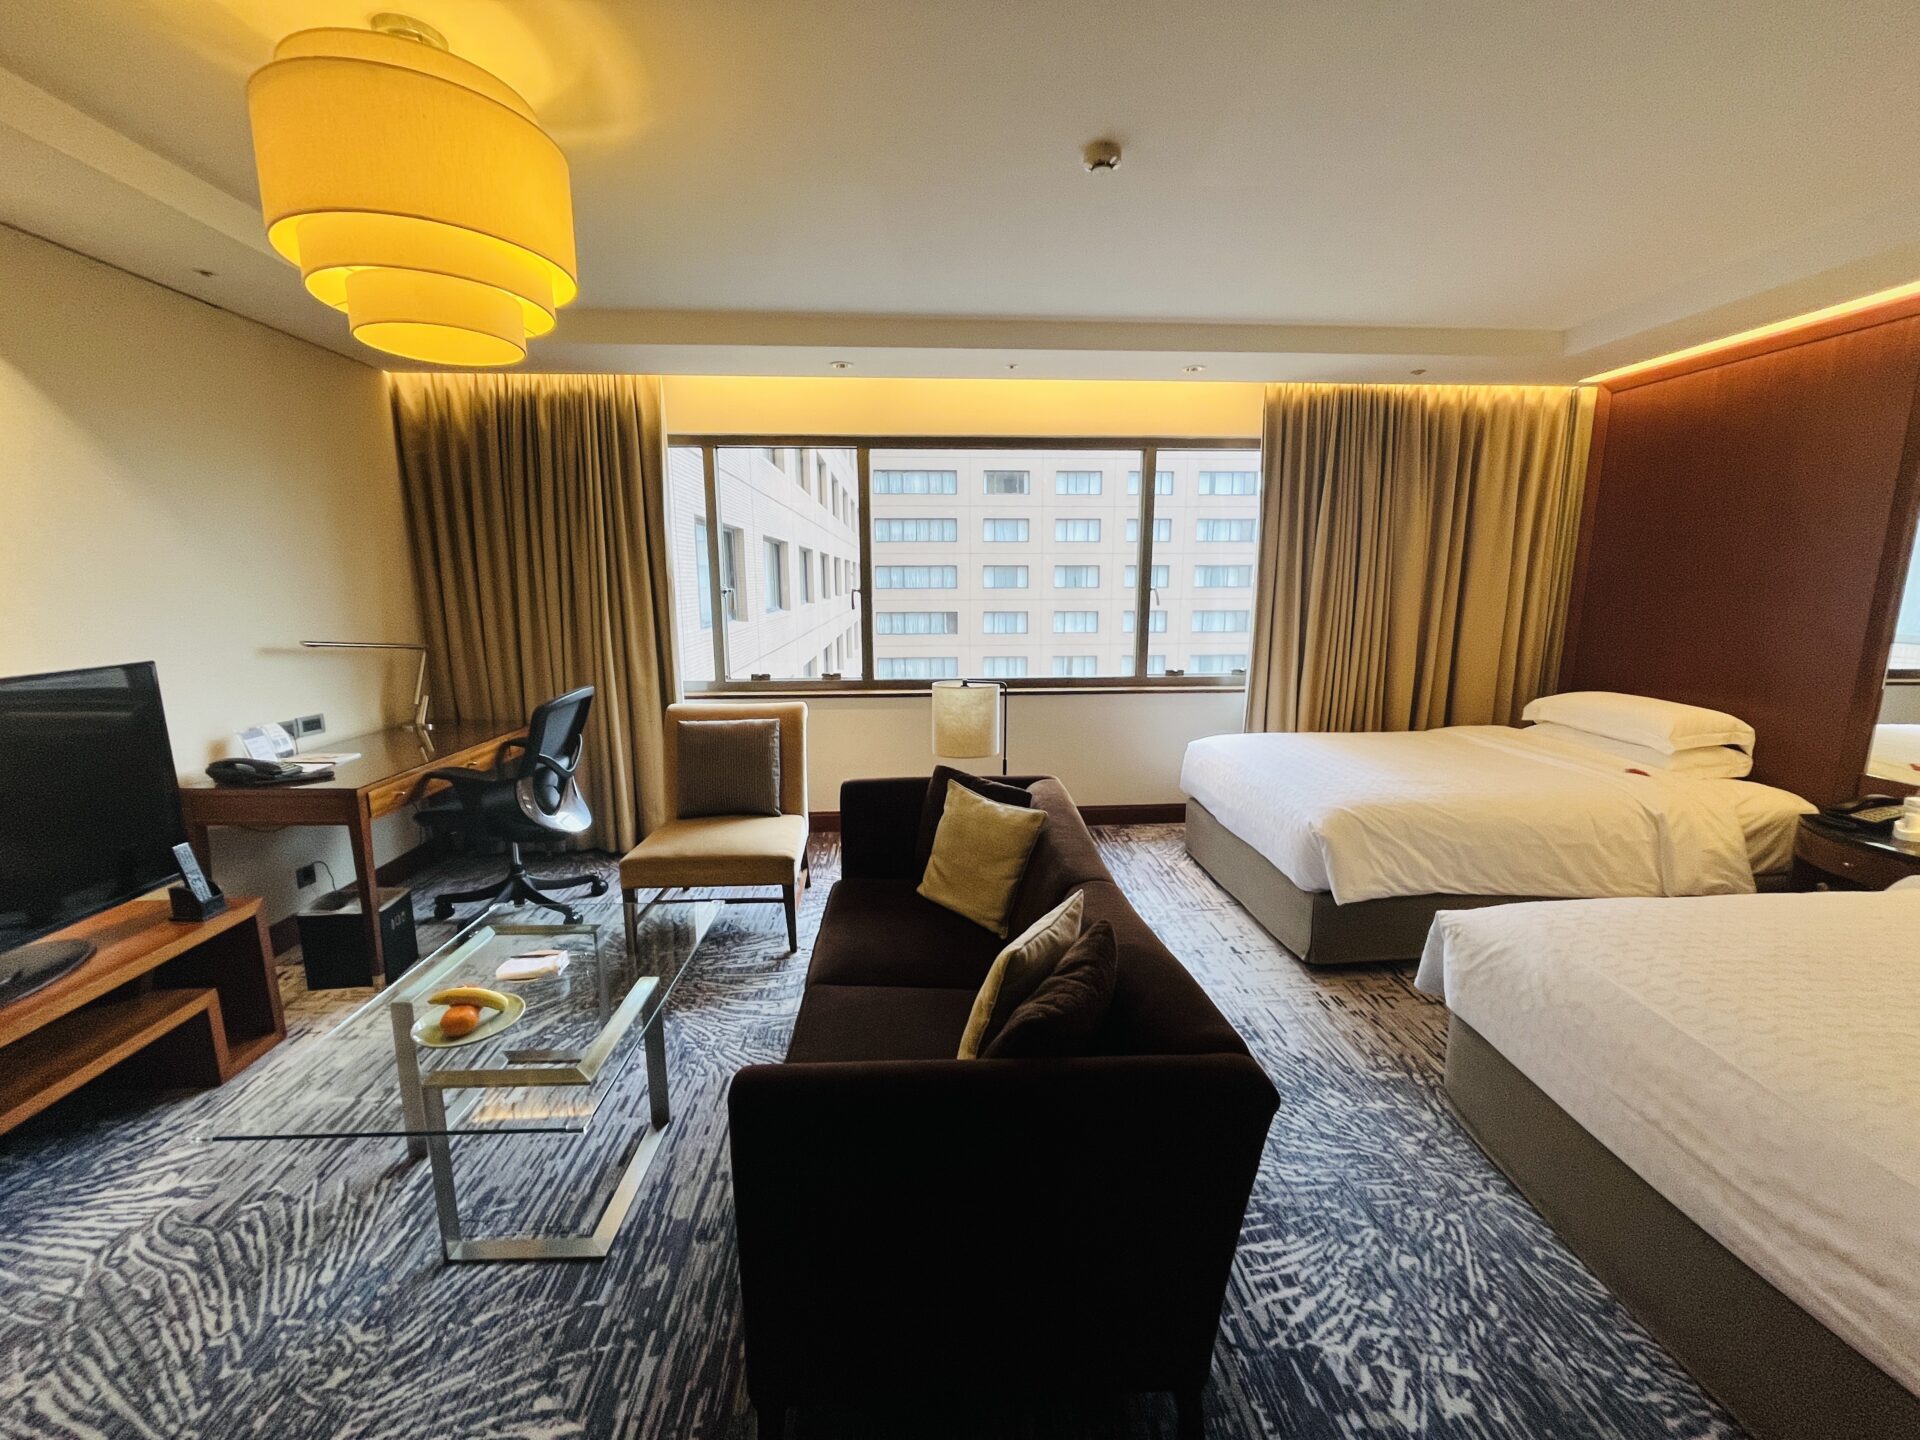 Review Marriott Platinum Upgrade and Benefits at Sheraton Grand Taipei in Taiwan